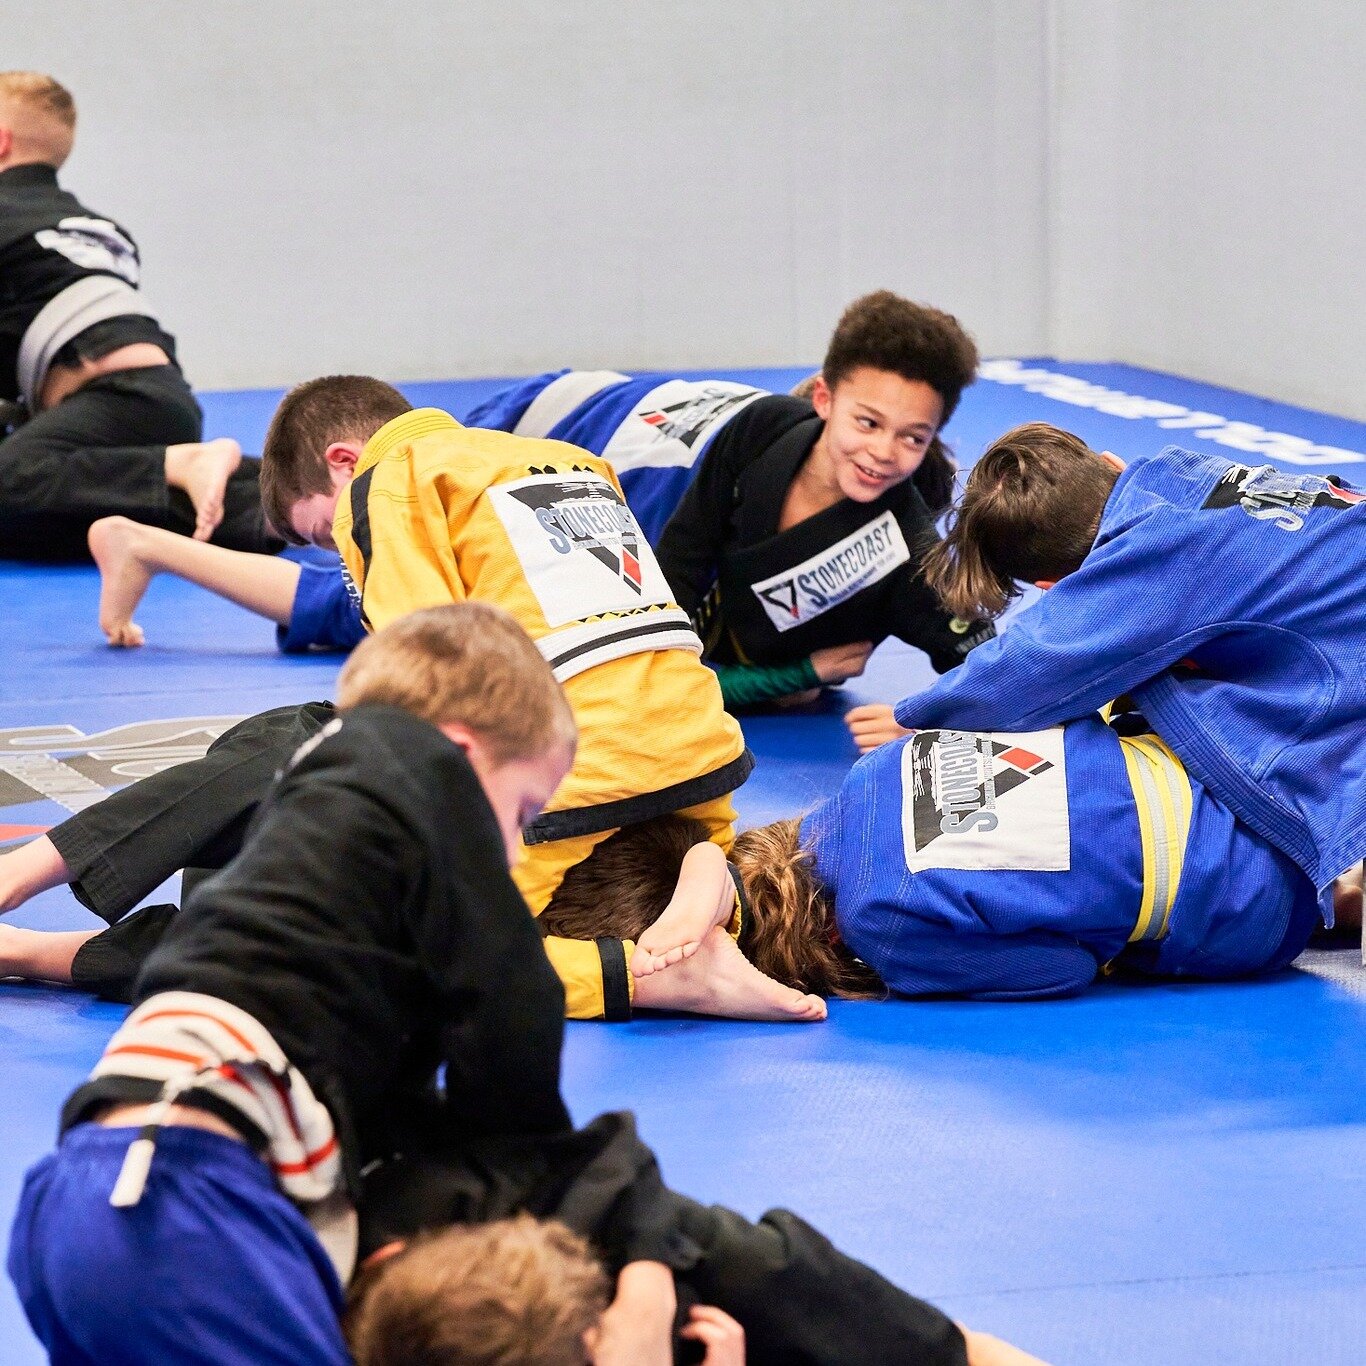 &quot;Find your tribe at Stonecoast Brazilian Jiu Jitsu. Friends who train together, grow together. Bring a friend and get ready to embark on an adventurous journey in martial arts! #BJJFriends #MartialArtsCommunity #TrainTogether&quot;